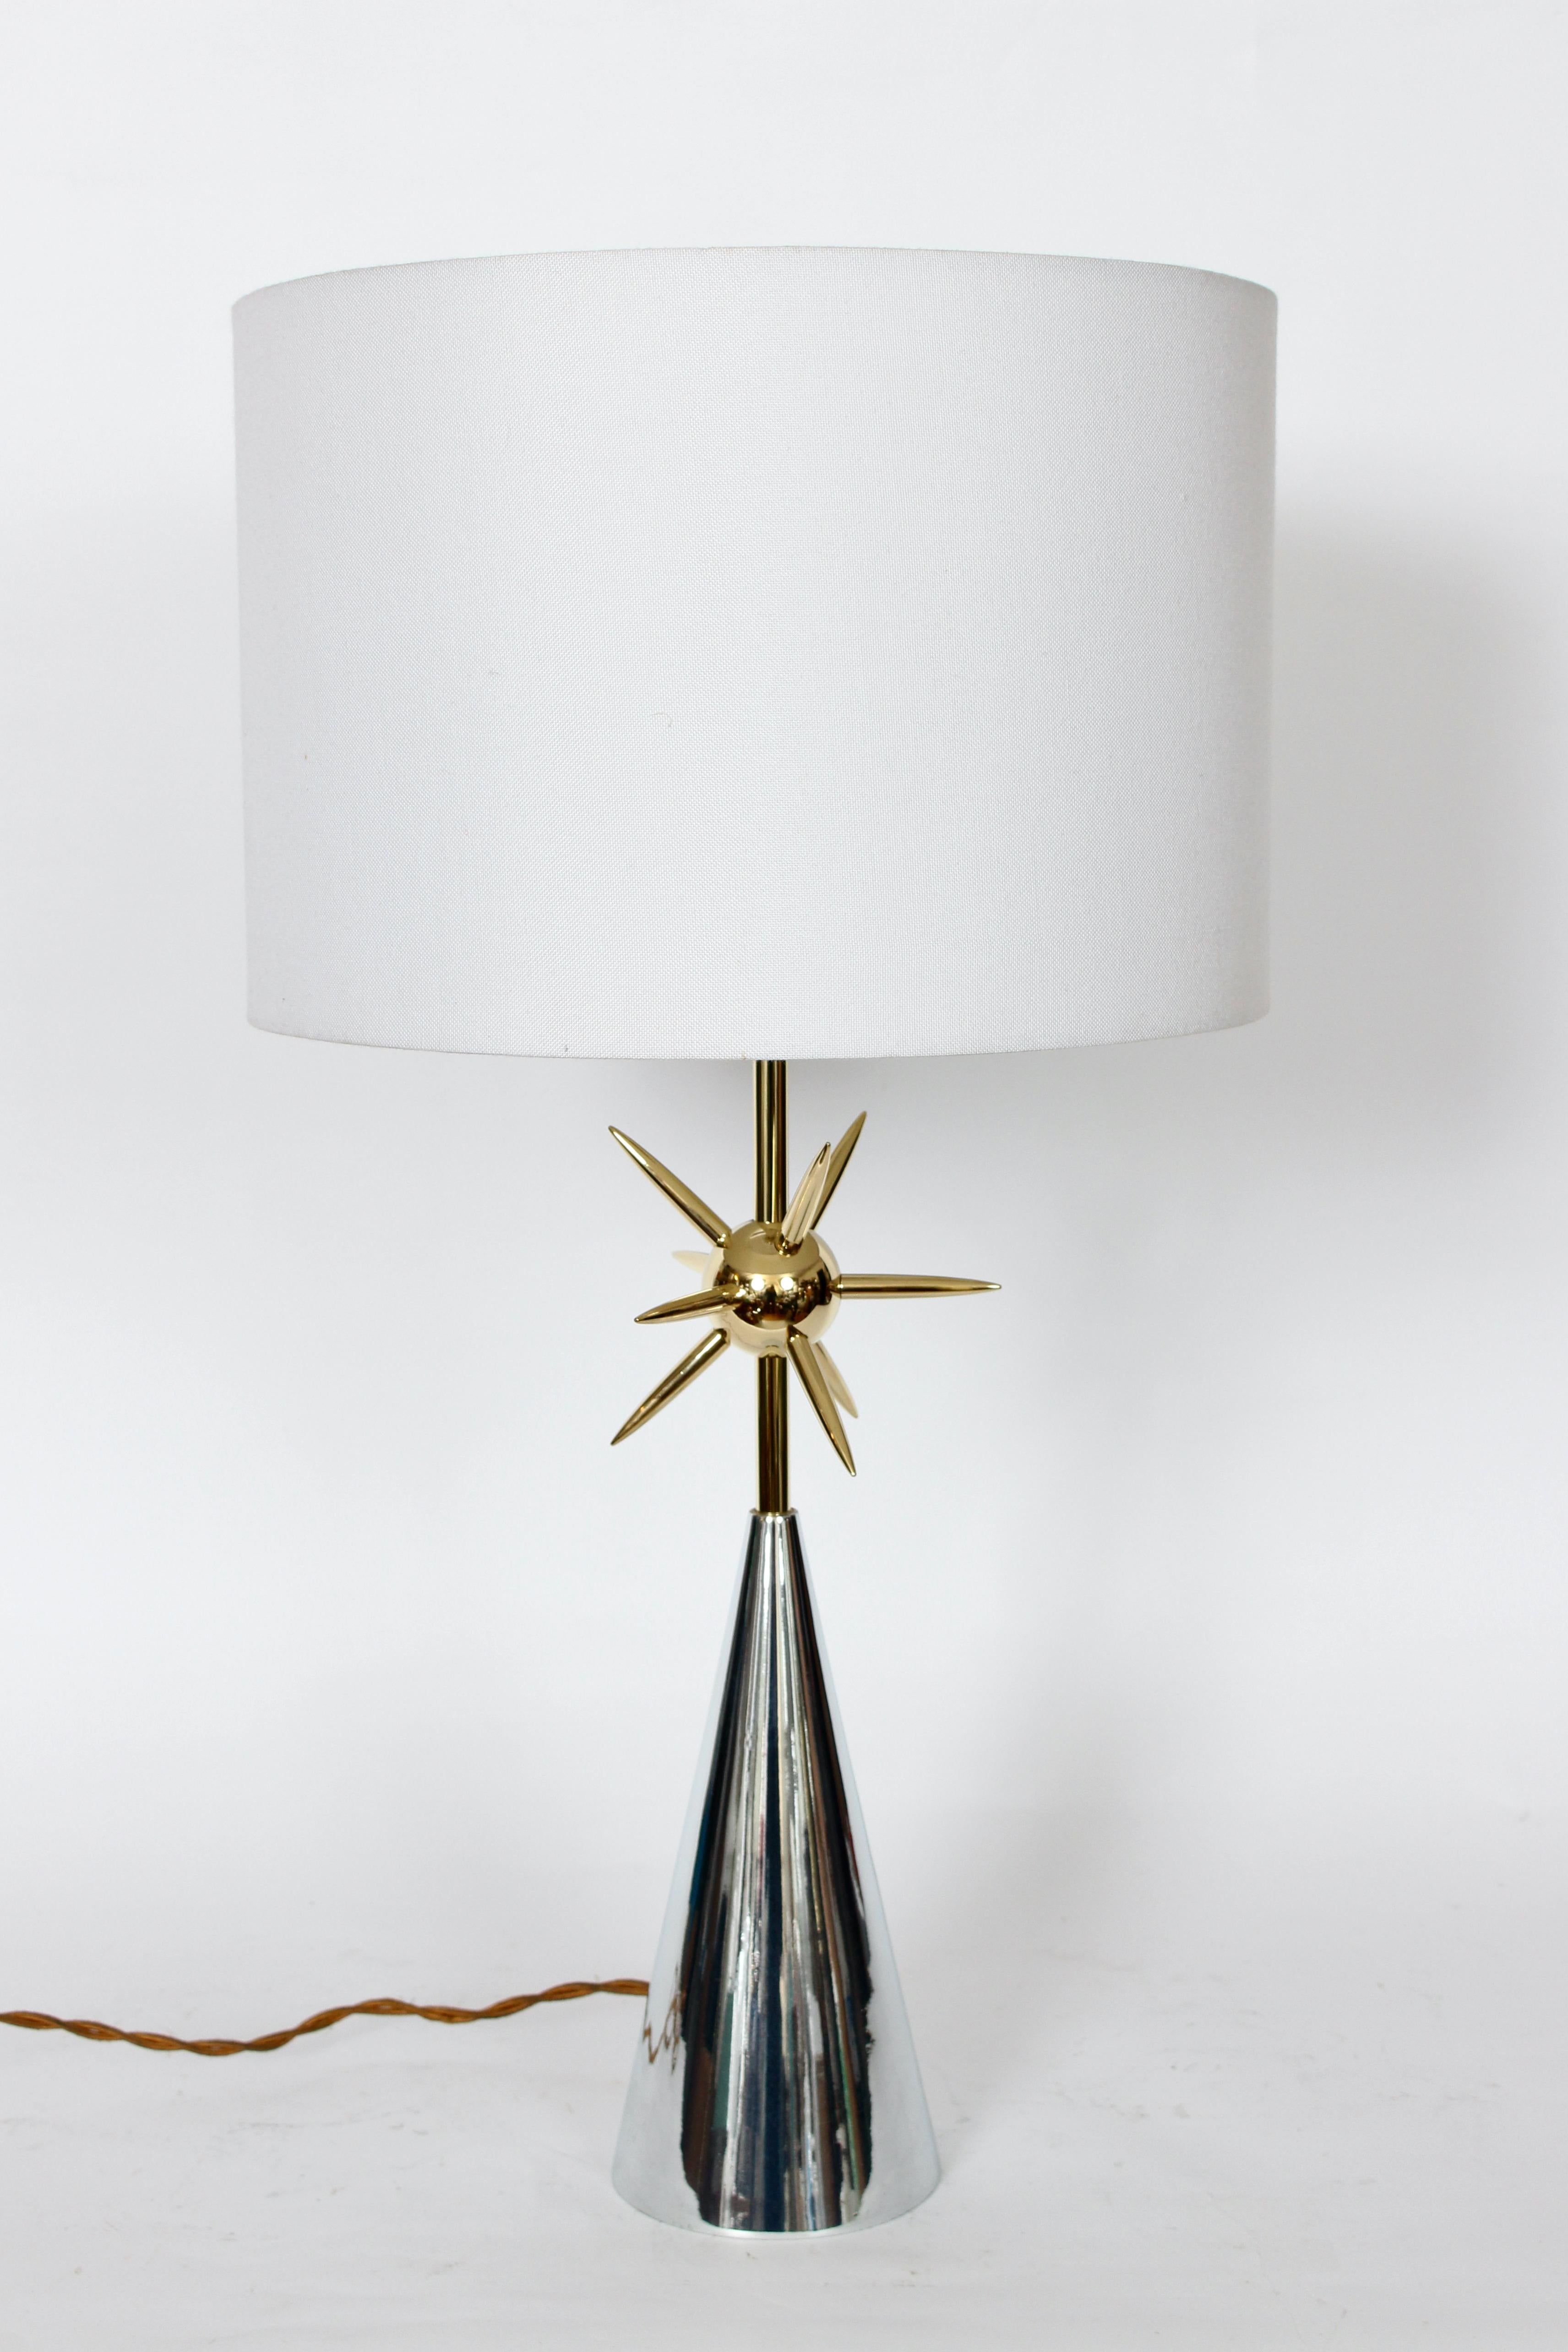 Mid-Century Modern Vintage Mutual Sunset Lamp Co. Atomic Sputnik Polished Metals Table Lamp, 1950's For Sale